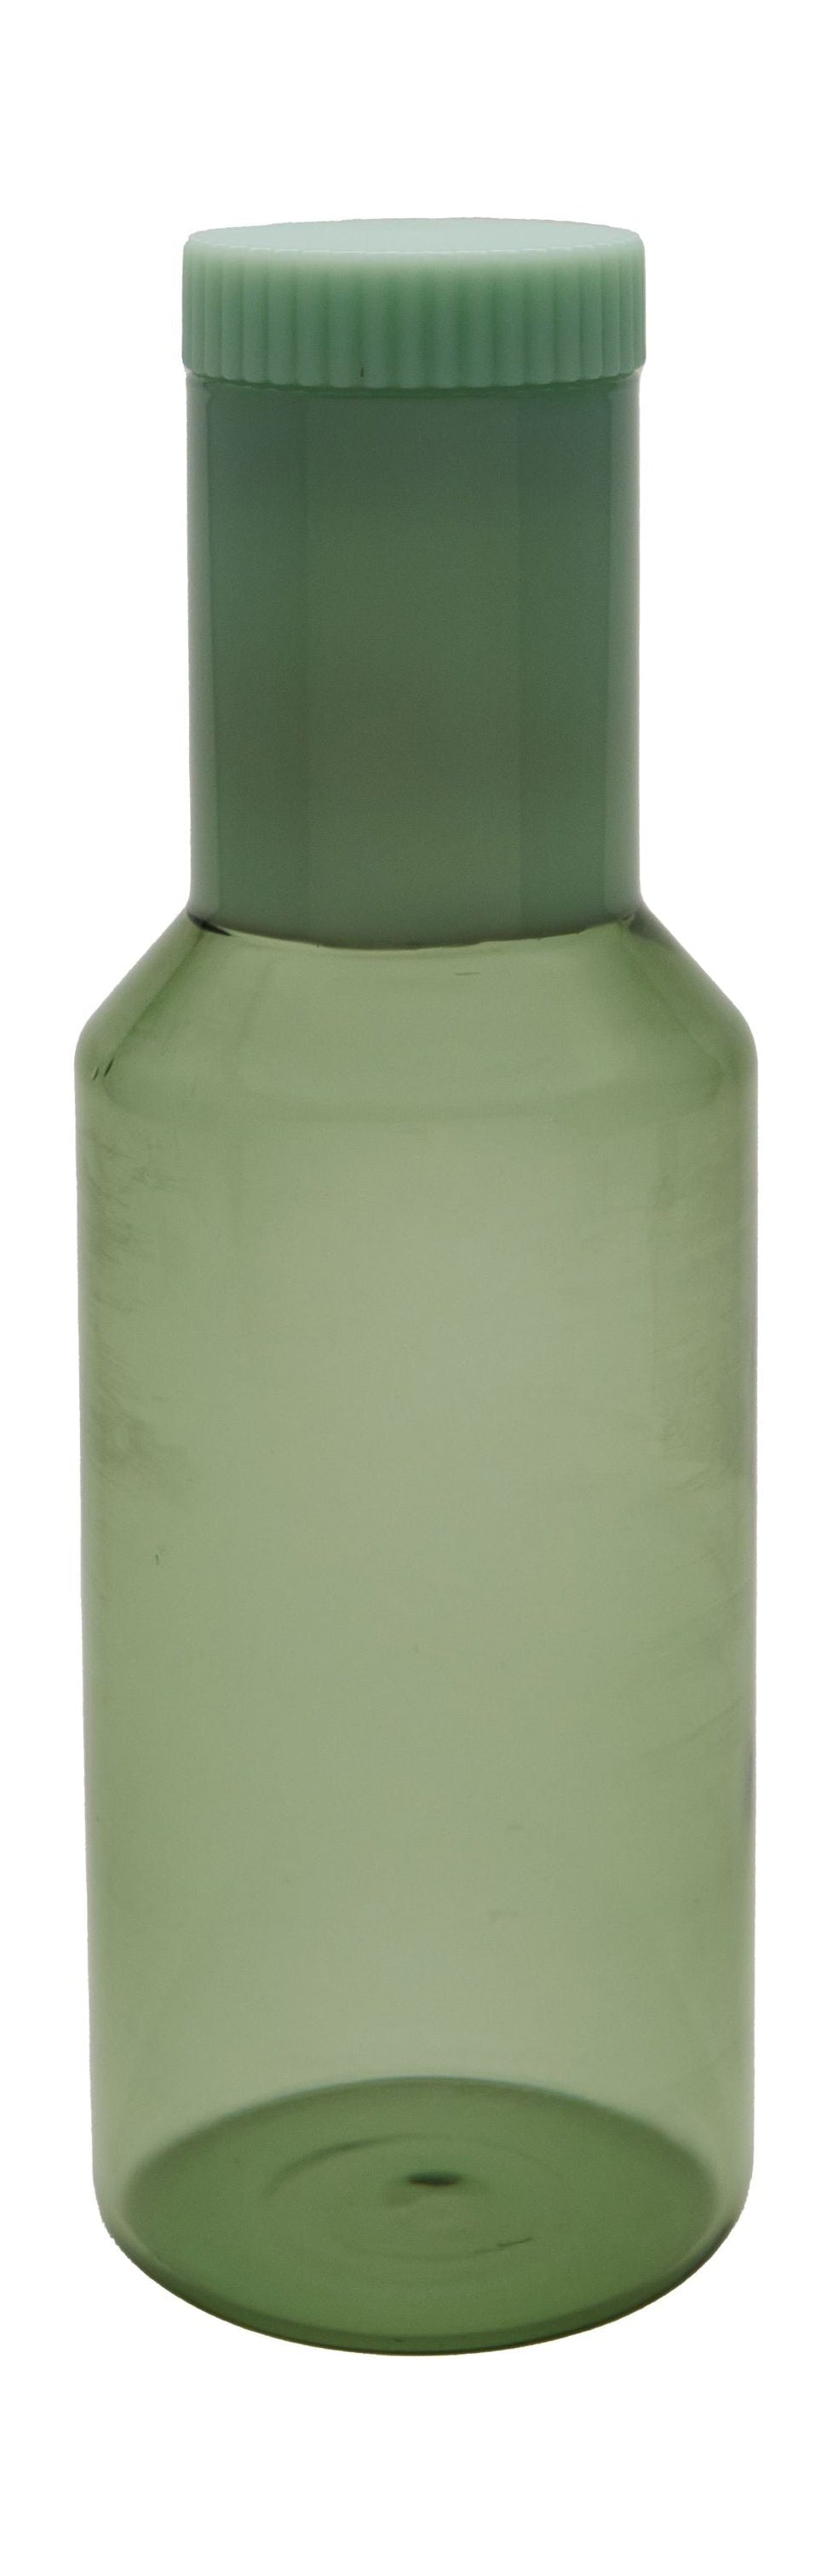 Design Letters Tube Carafe Made Of Glass, Green/Milky Green